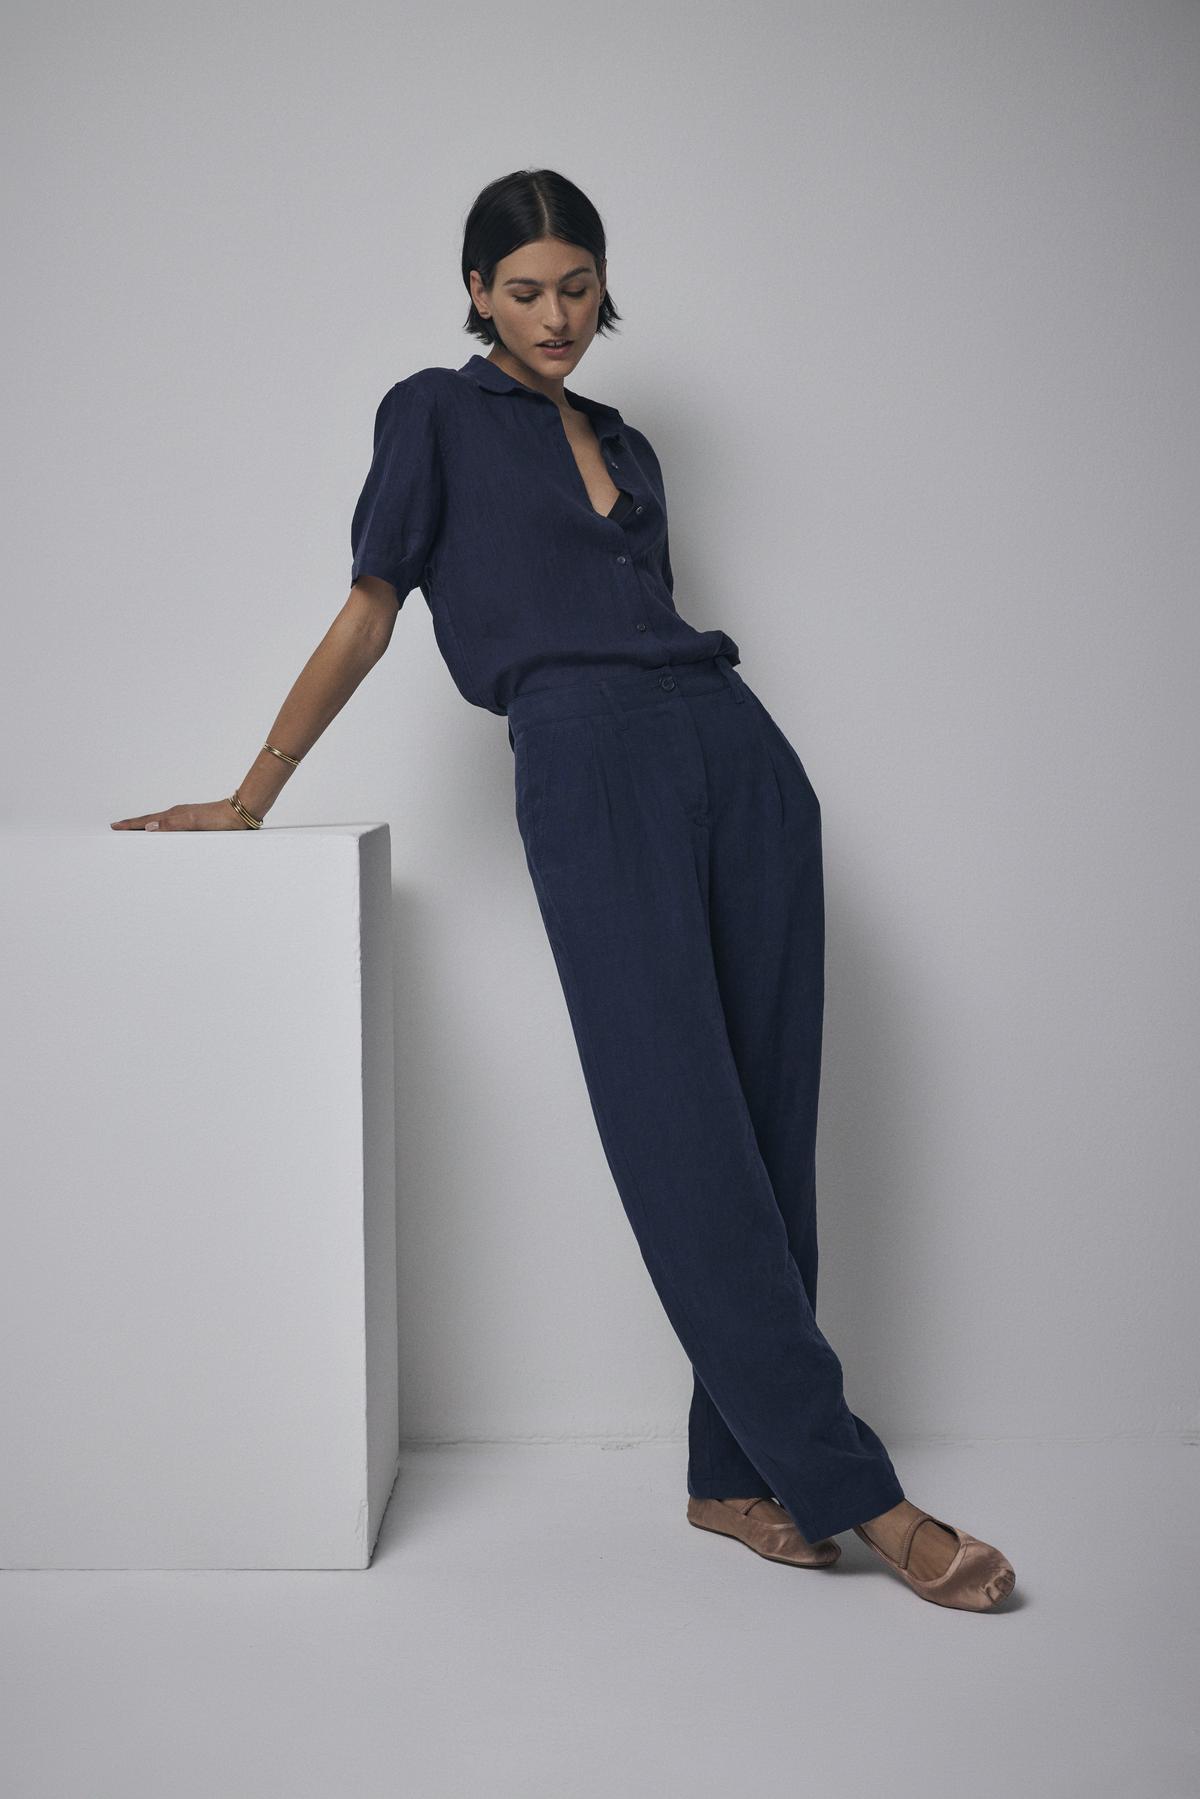 A woman is posing for a photo in Velvet by Jenny Graham's Pomona Pant in navy.-36168716779713